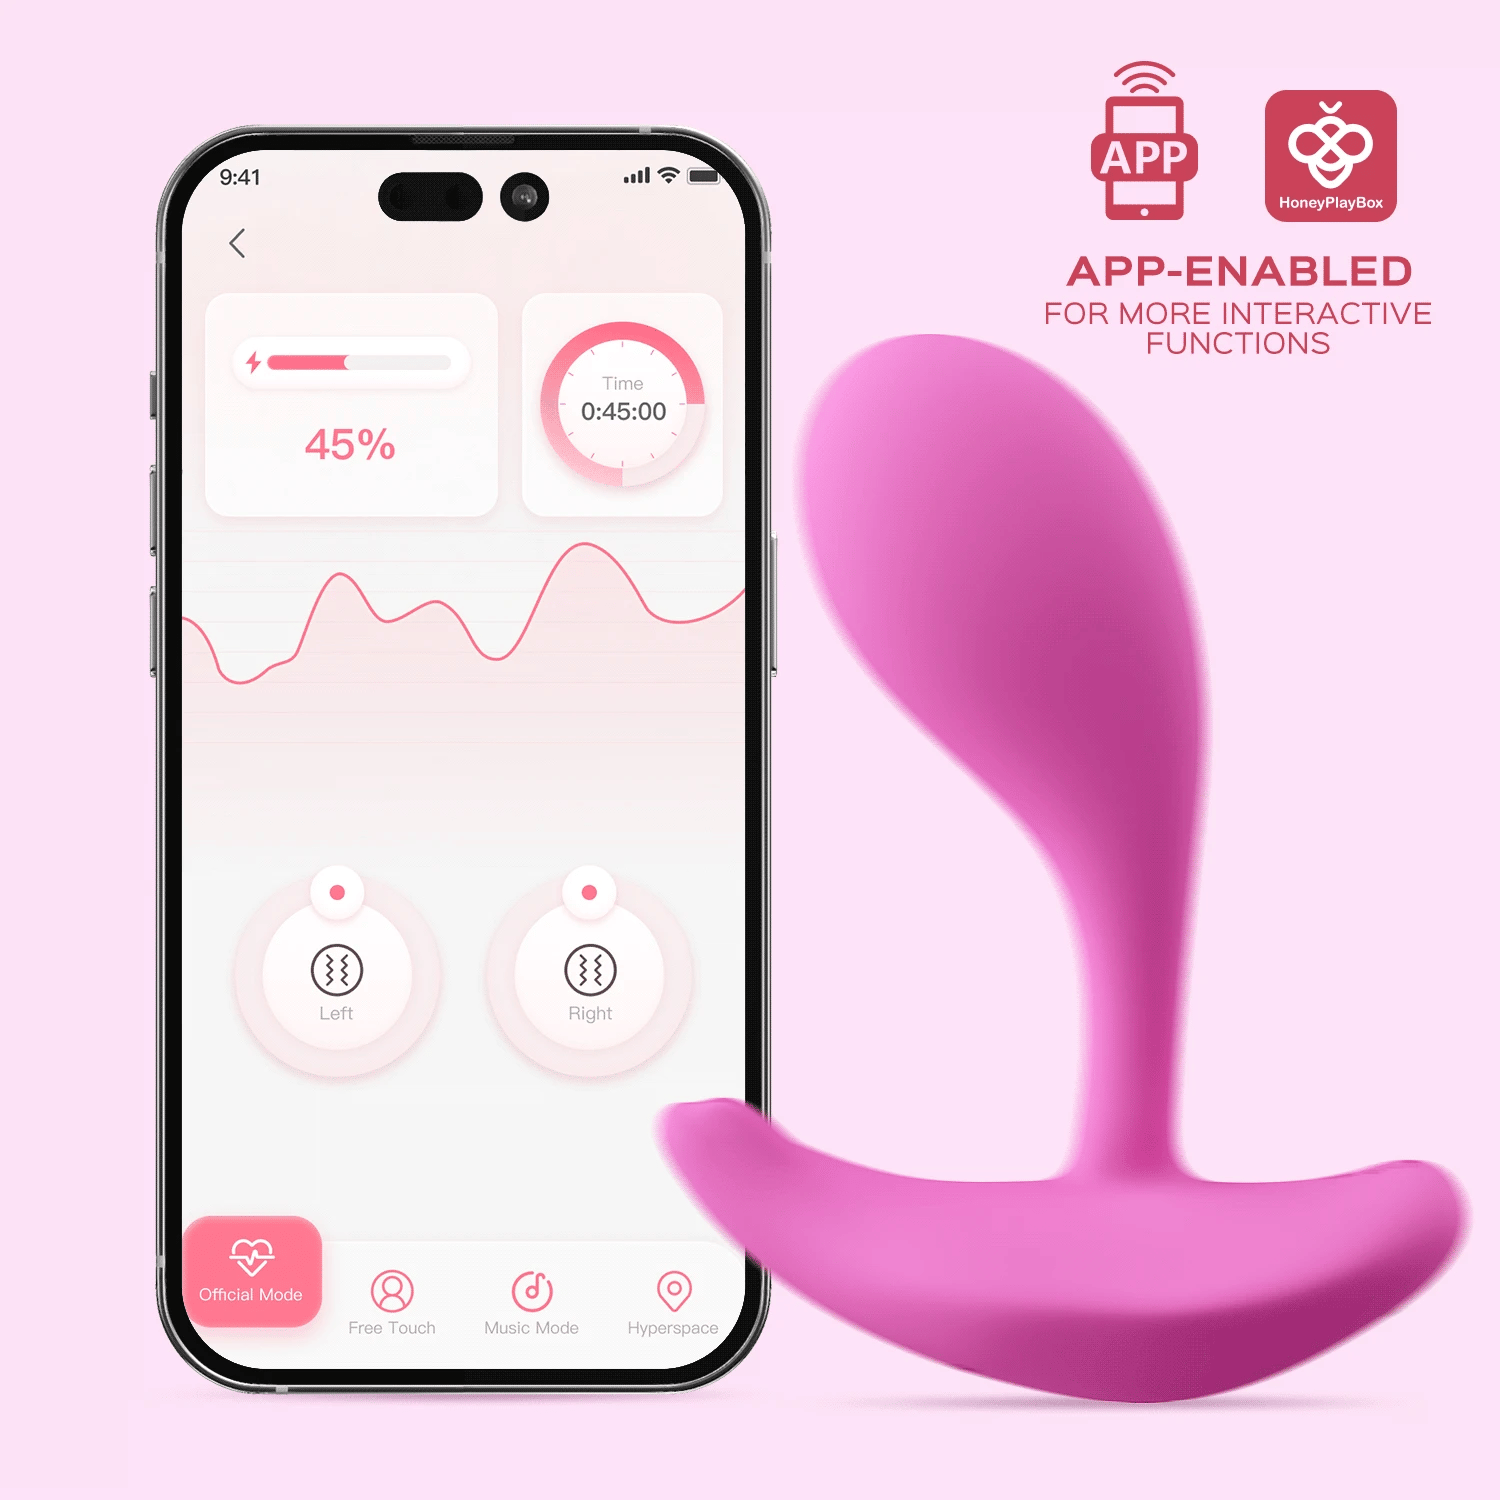 OLY 2 Pressure Sensing APP-enabled Wearable Clit & G Spot Vibrator - Honey Play Box Official